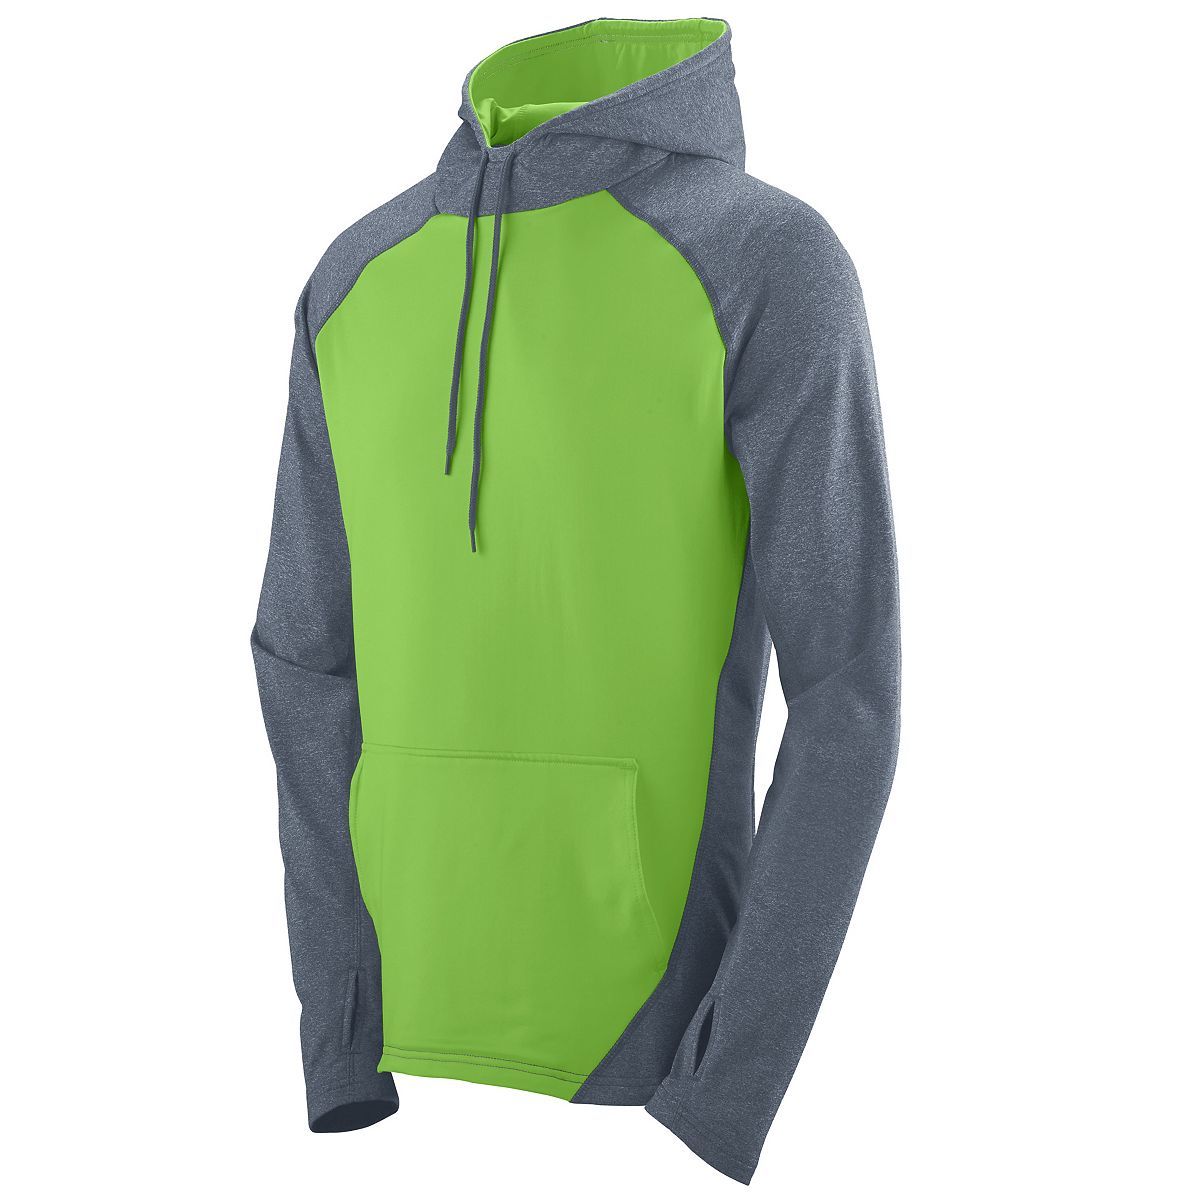 Augusta Sportswear Zeal Hoodie in Graphite Heather/Lime  -Part of the Adult, Adult-Hoodie, Hoodies, Augusta-Products product lines at KanaleyCreations.com